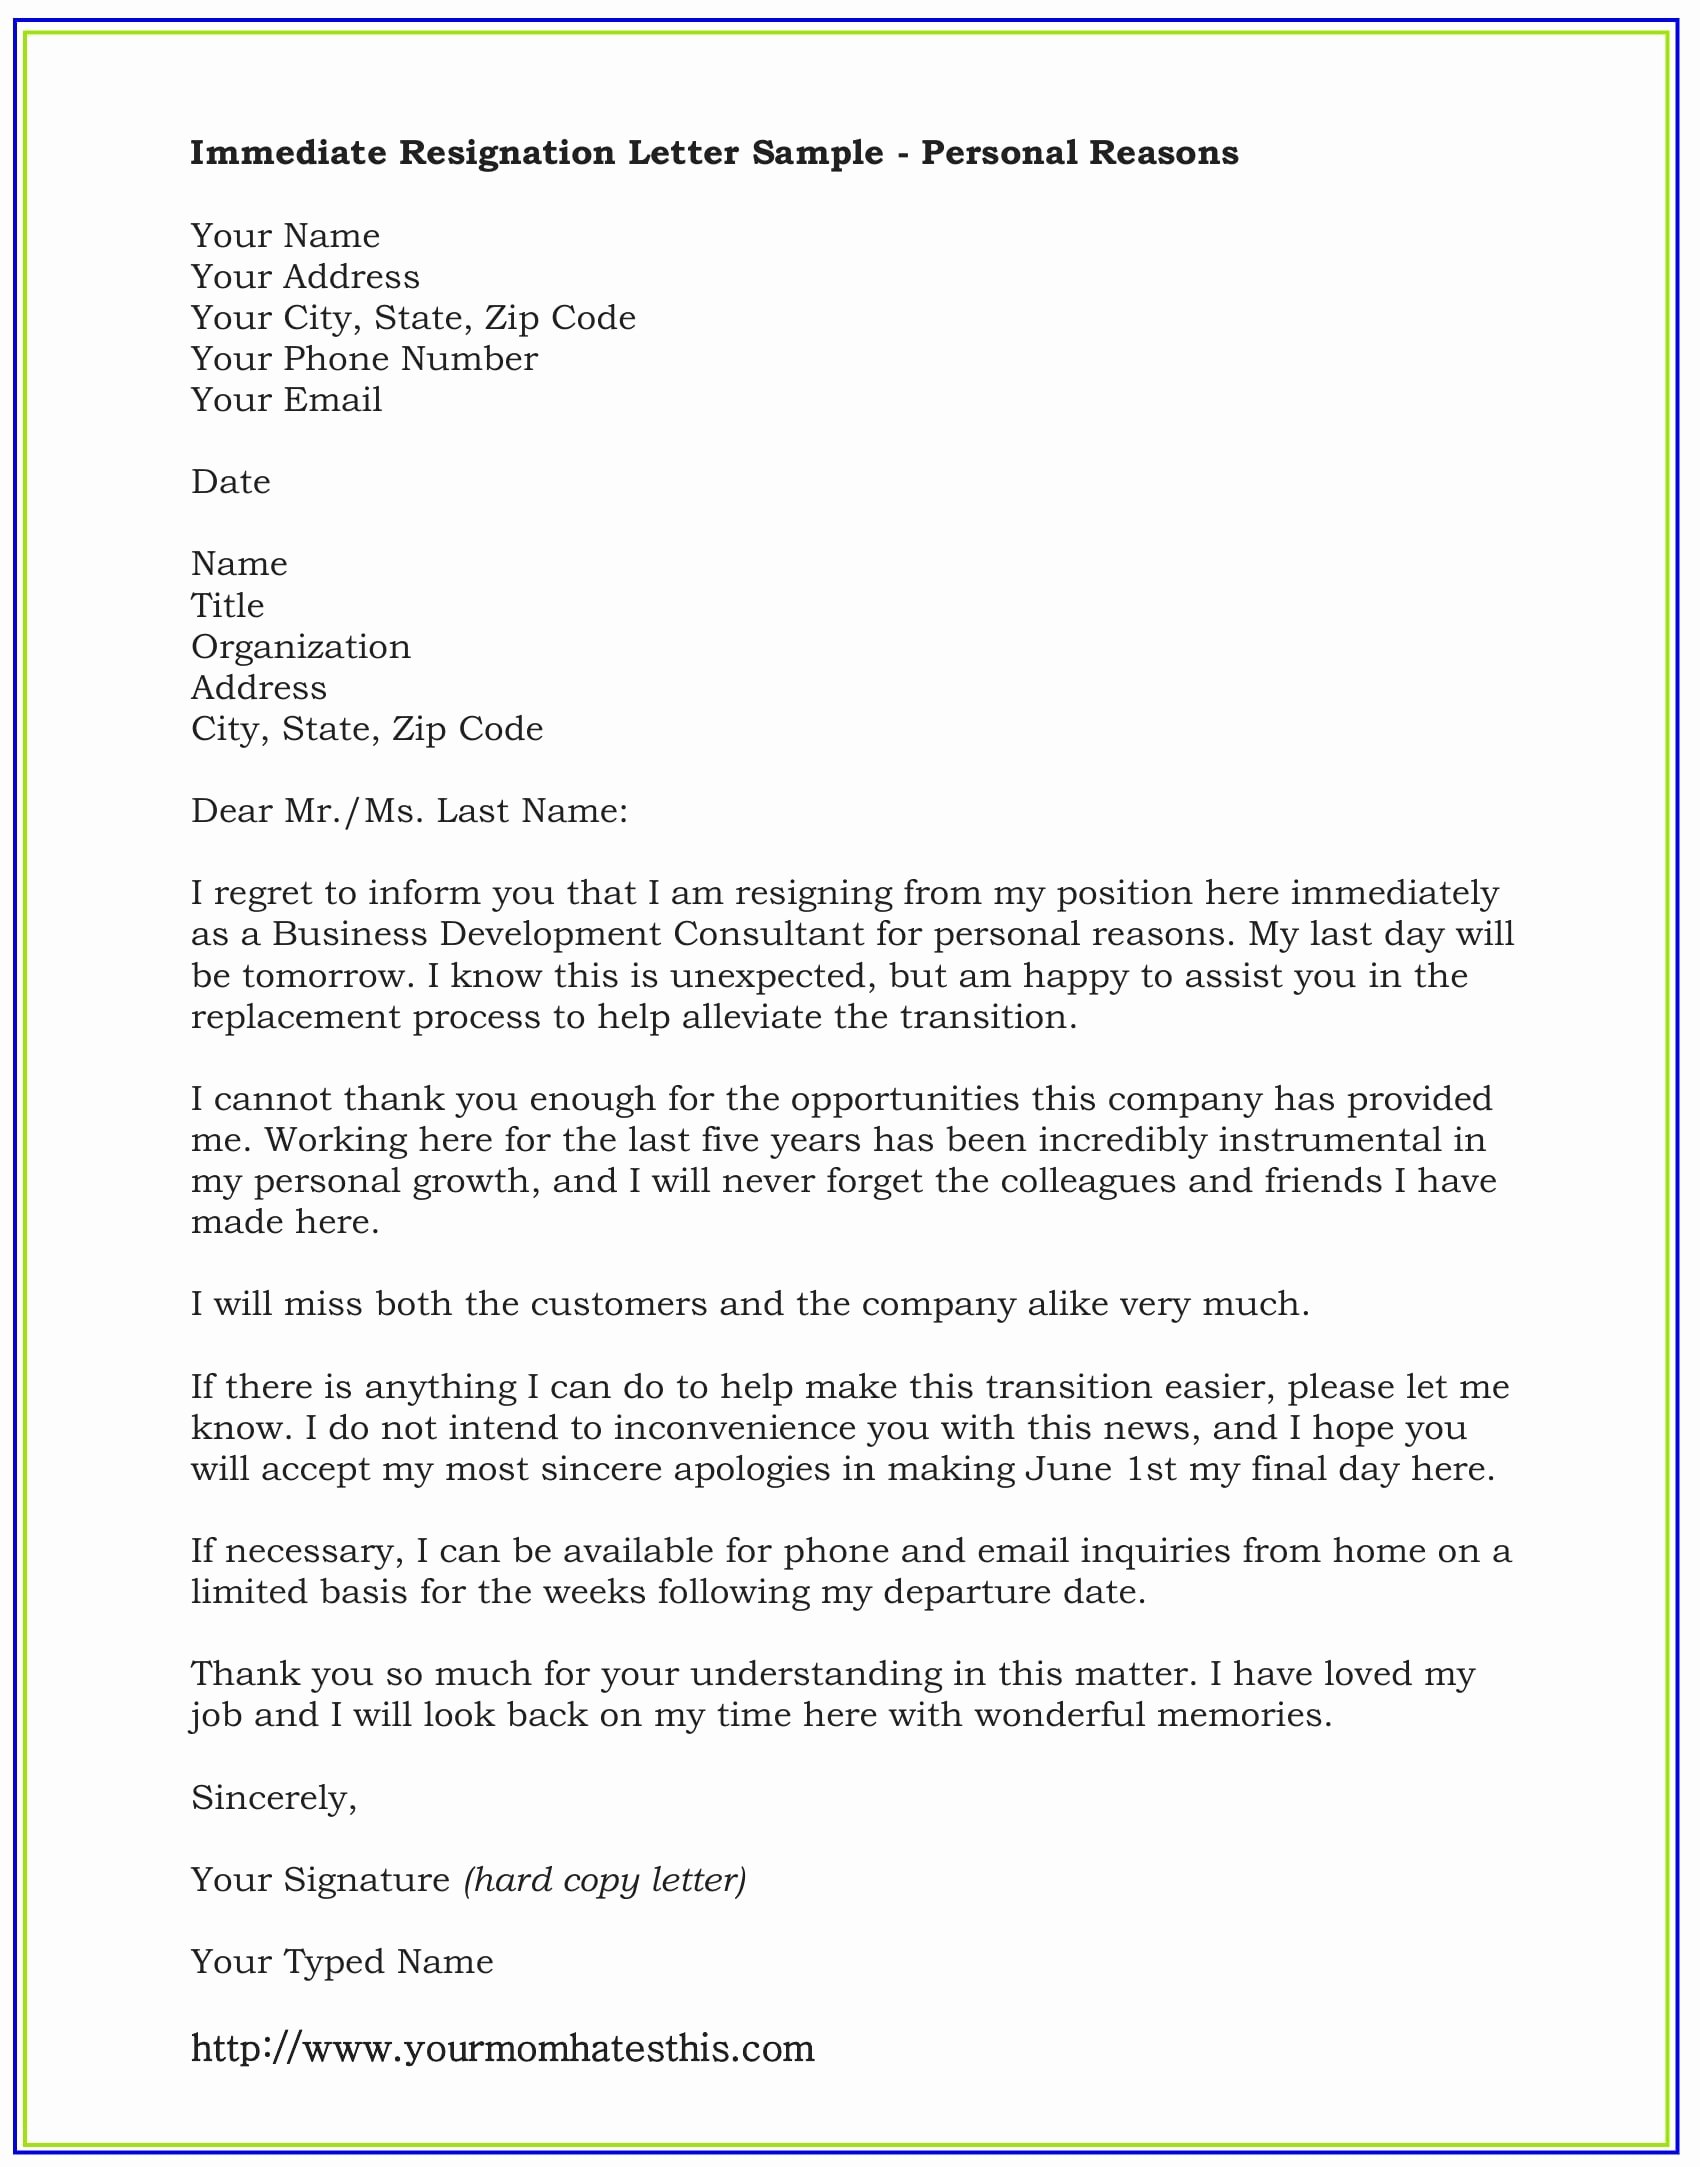 Resignation Letter for Personal Reasons Fresh Dos and Don’ts for A Resignation Letter